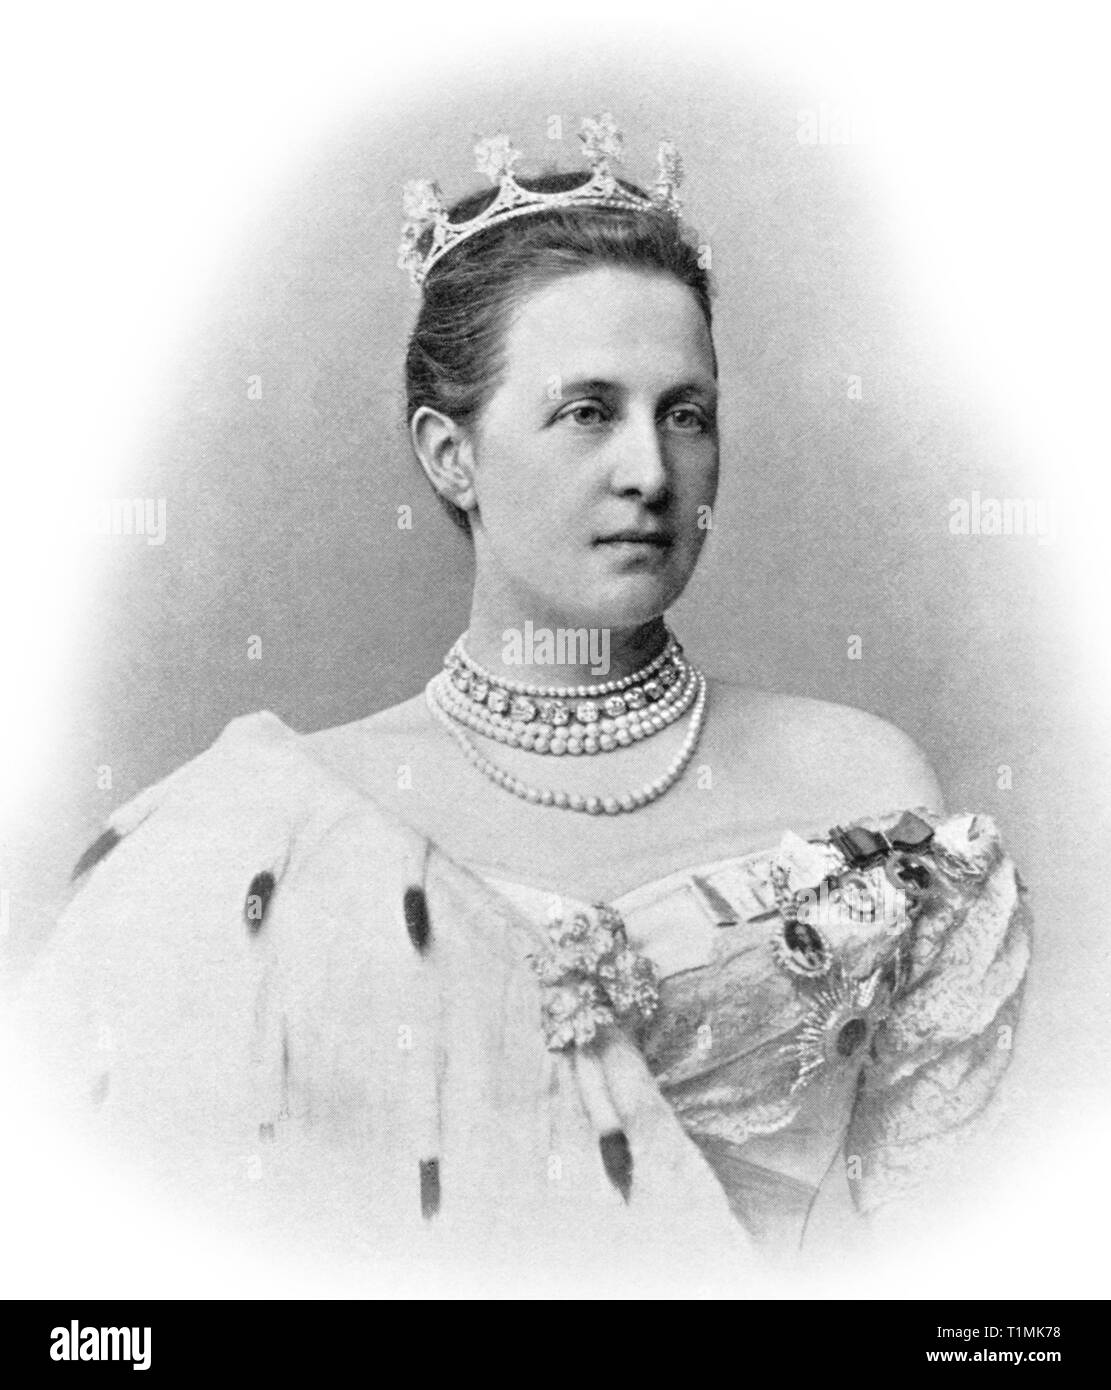 1897 photograph of Olga Constantinovna of Russia, Queen consort of the Hellenes, wife of King George I of Greece. Stock Photo